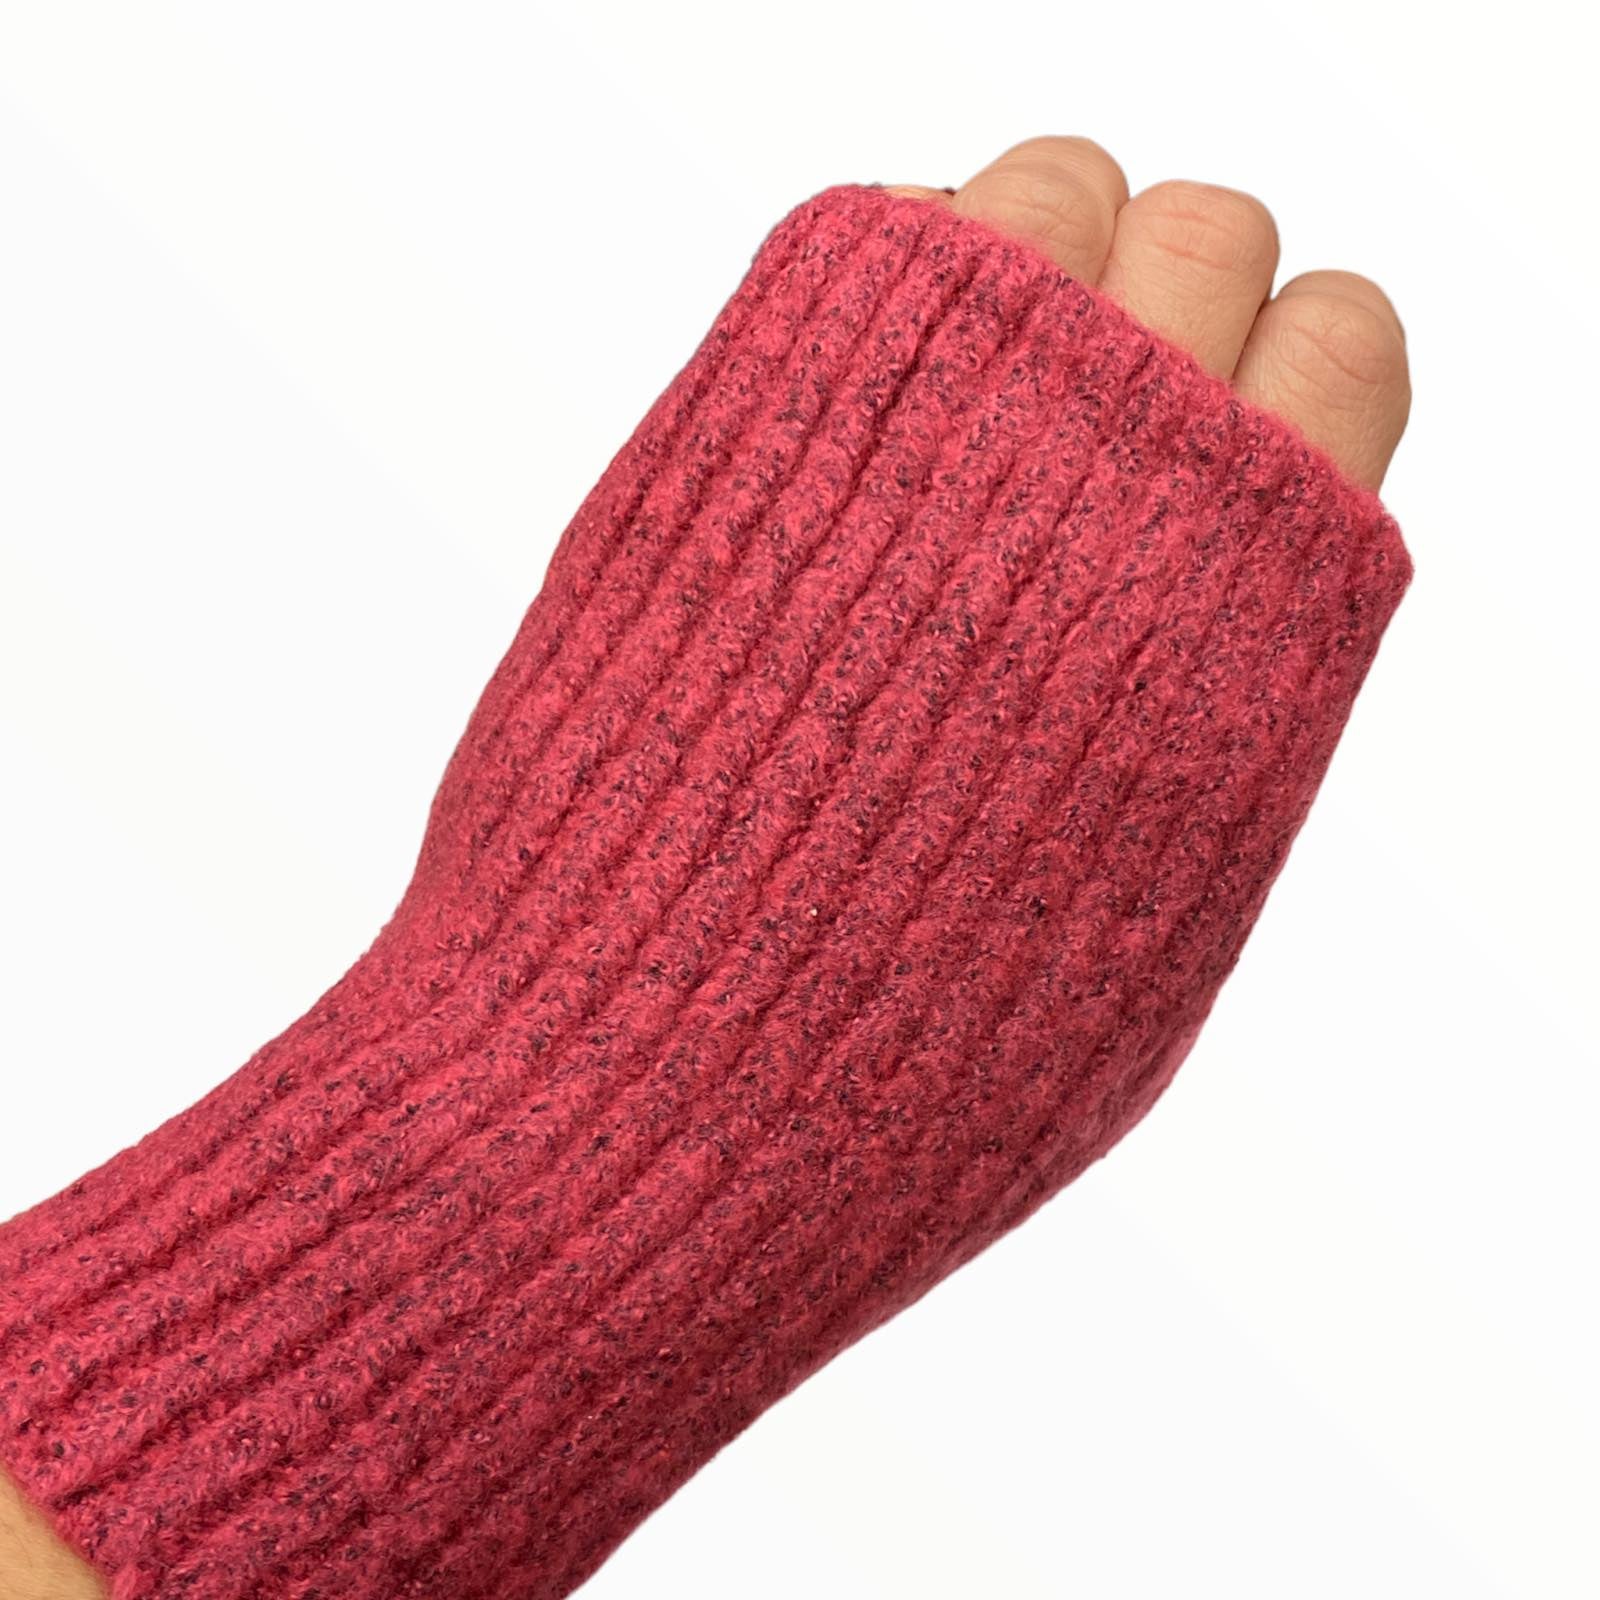 Strong pink 2 in 1 gloves